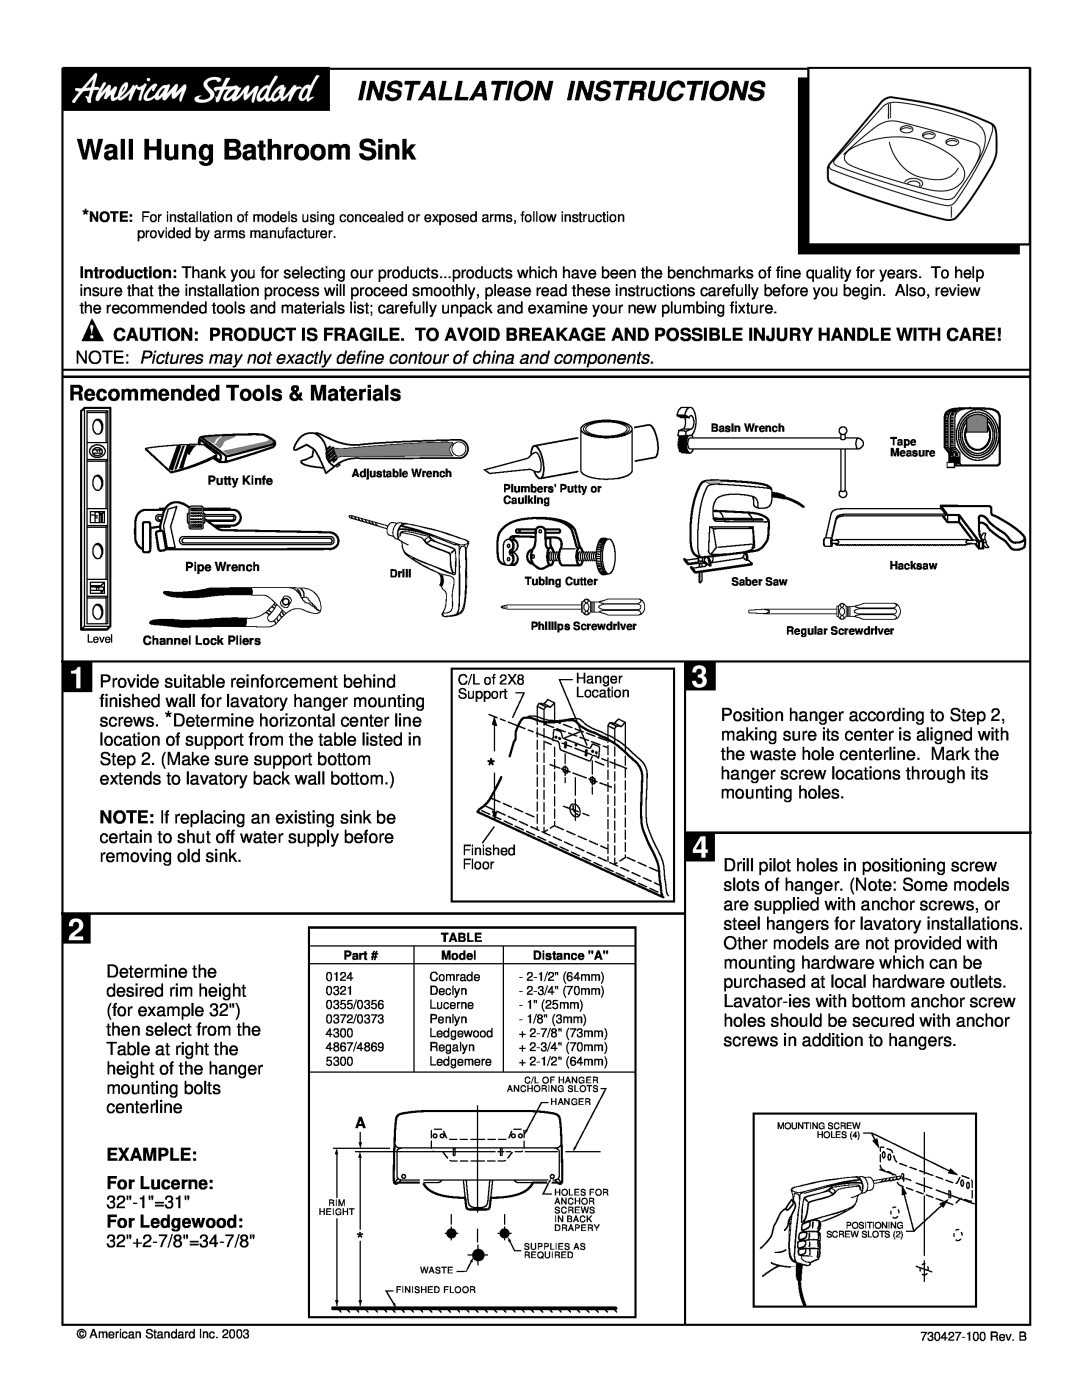 American Standard none installation instructions Wall Hung Bathroom Sink, Installation Instructions, For Lucerne 